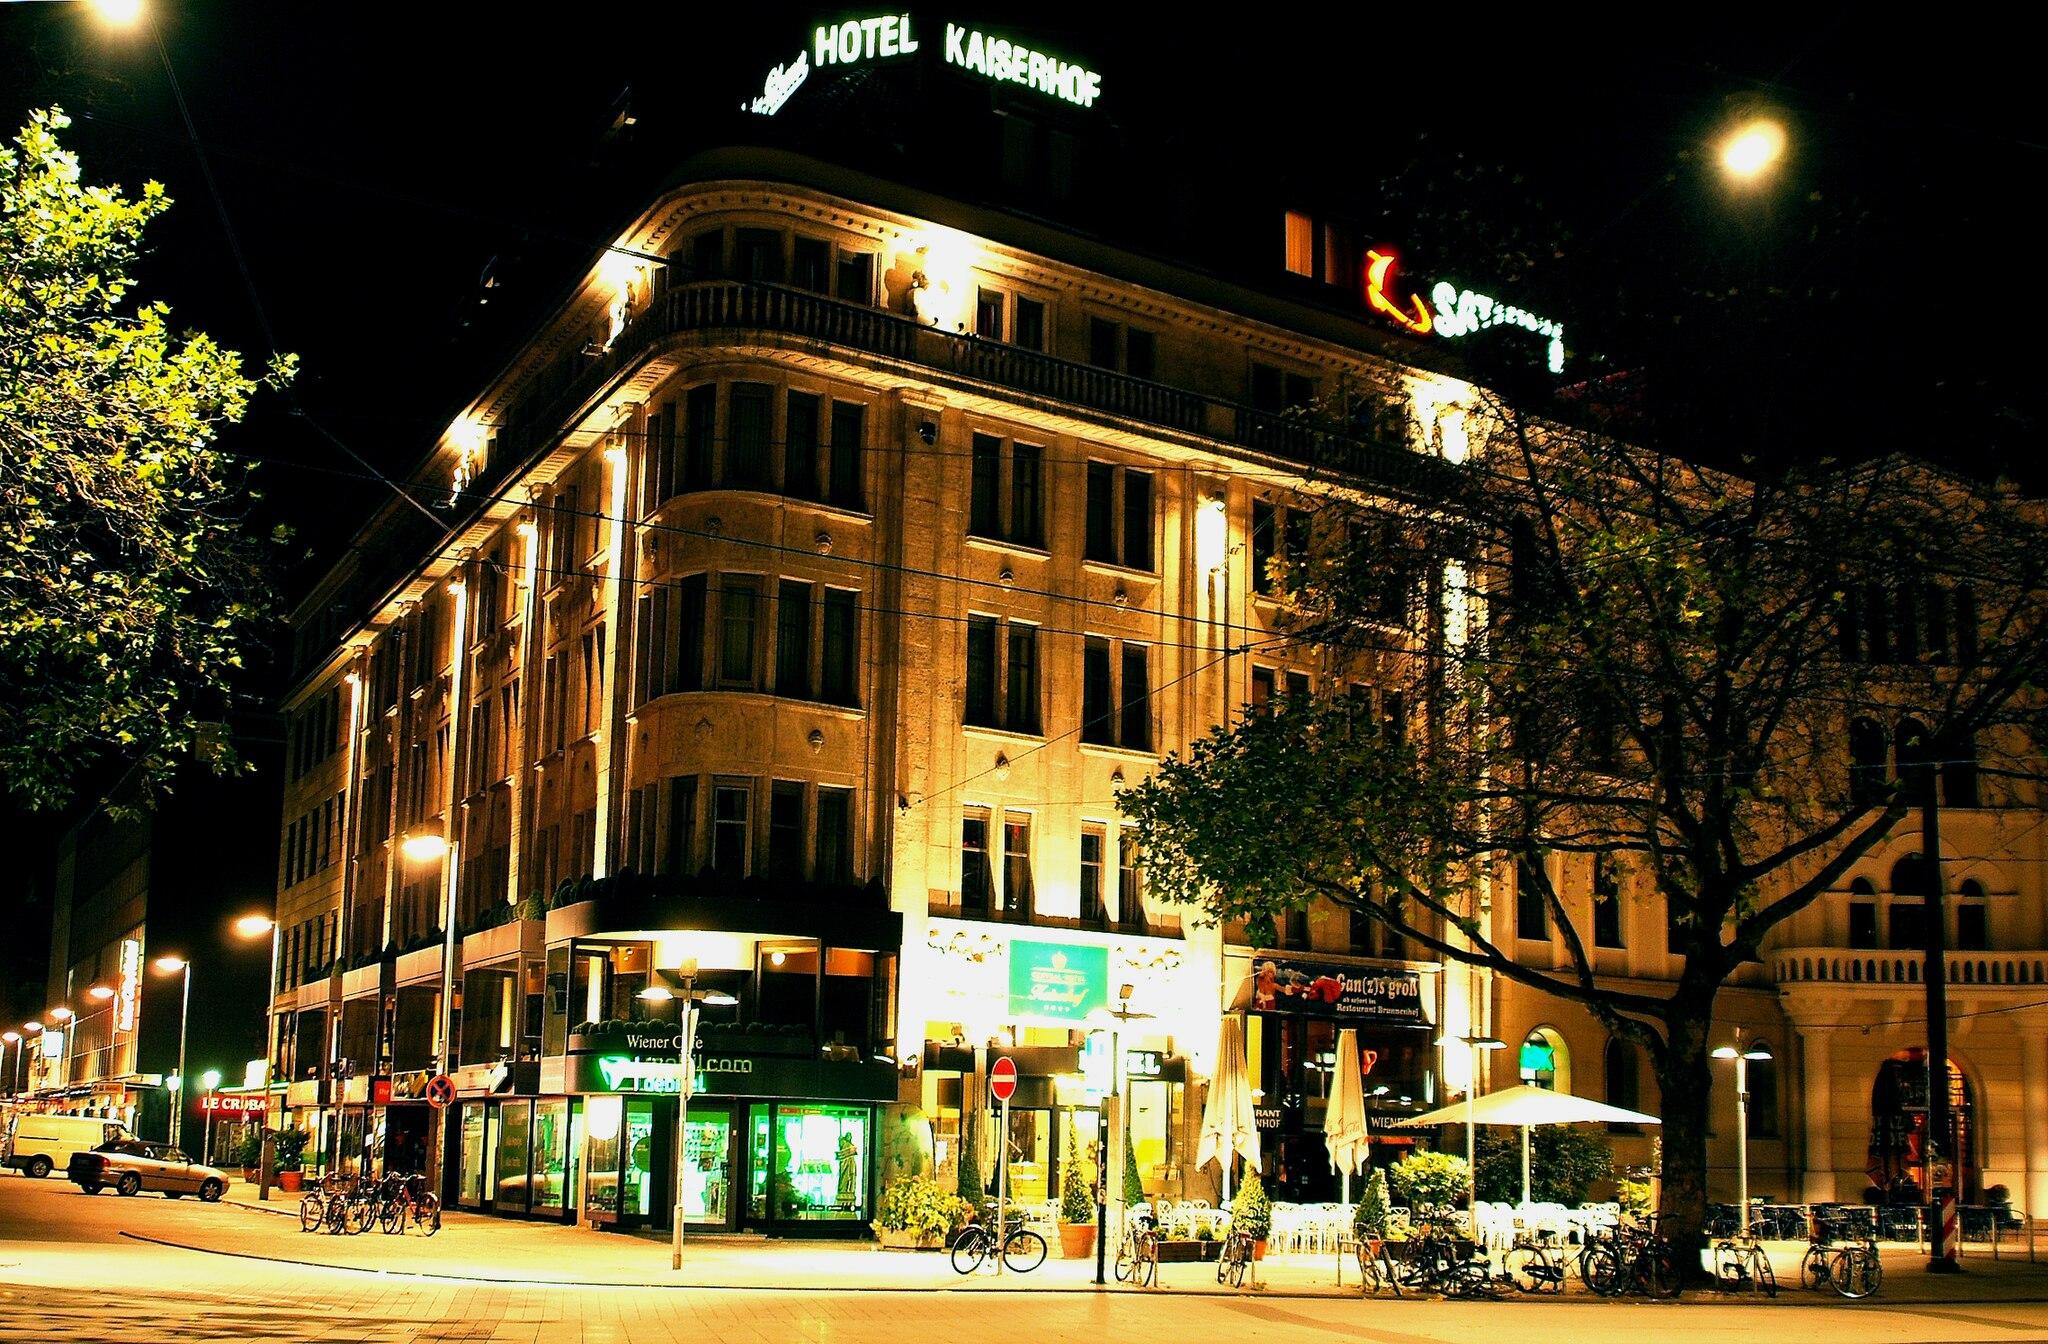 The illuminated building of the Central-Hotel Kaiserhof in Hannover at night.